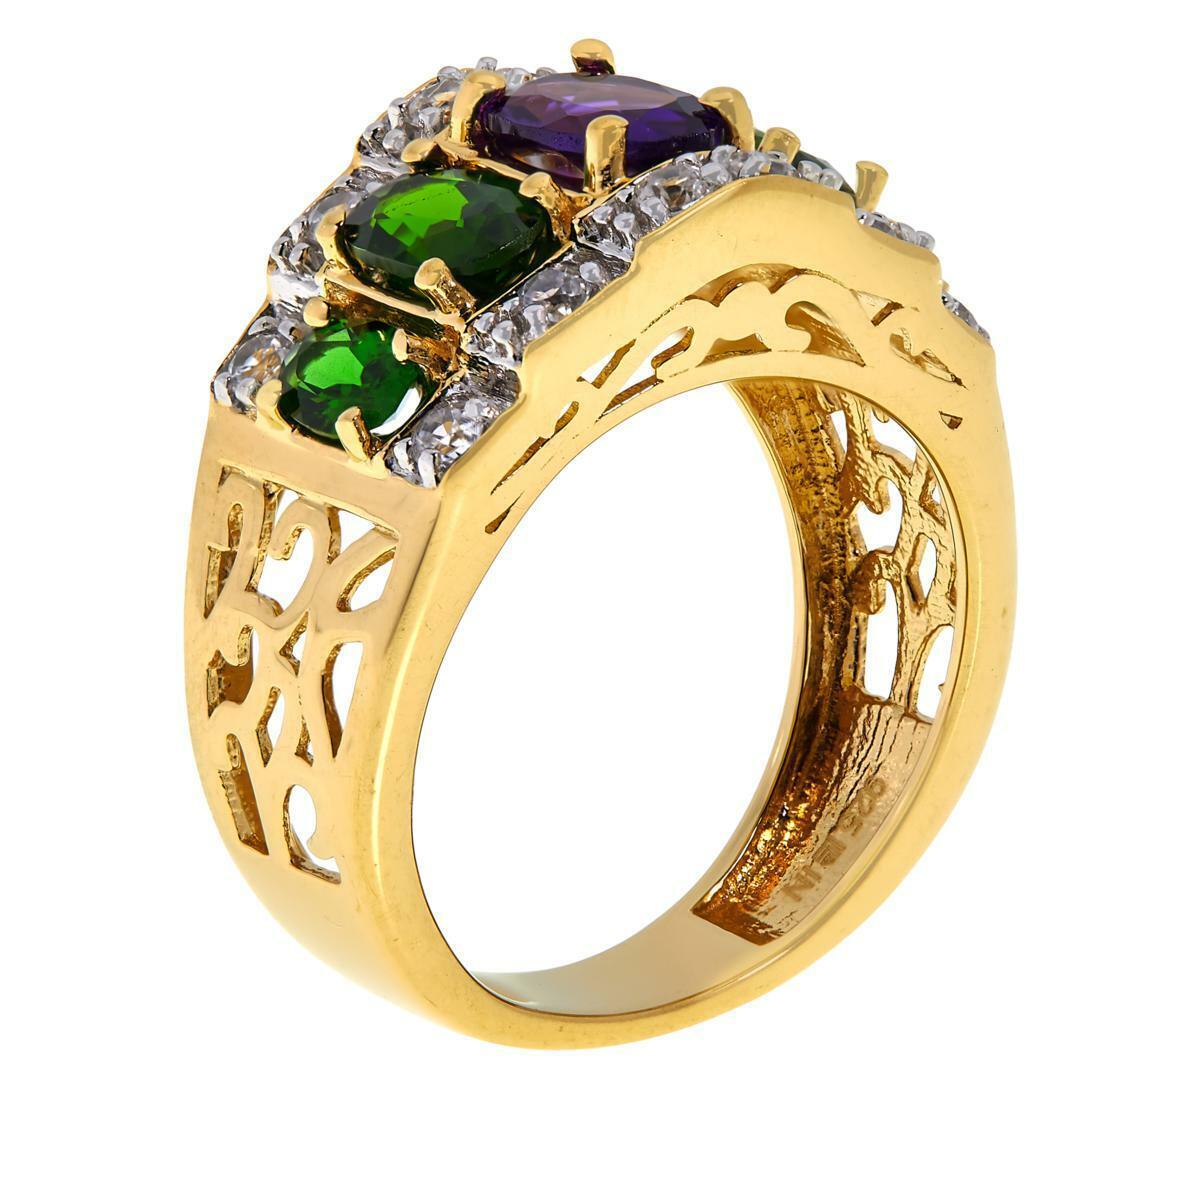 Colleen Lopez Gold-Plated Amethyst, Chrome Diopside and Zircon Ring, Size 6